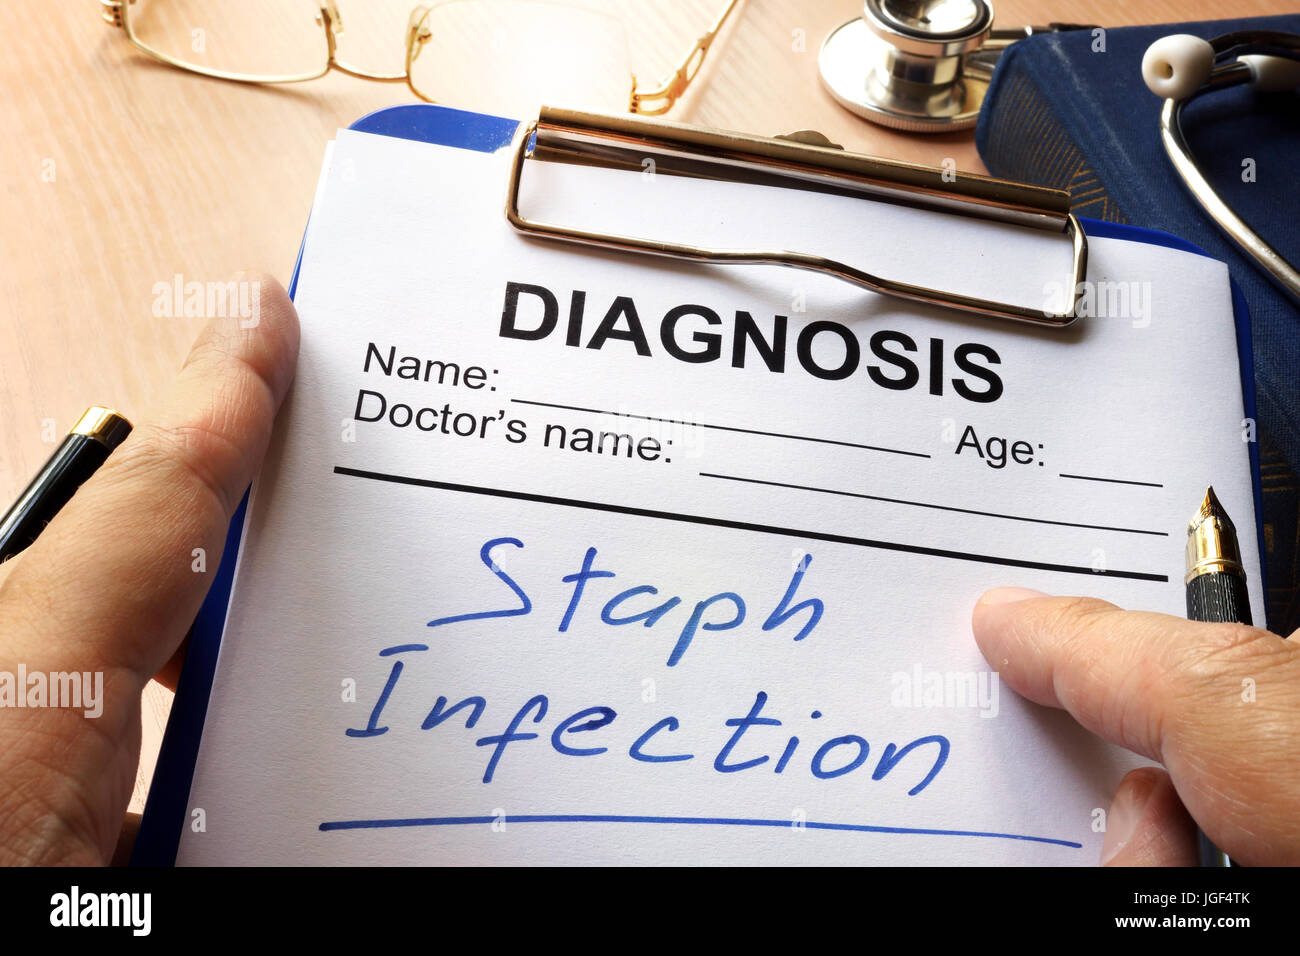 Staph Infection written on a diagnosis form. Stock Photo